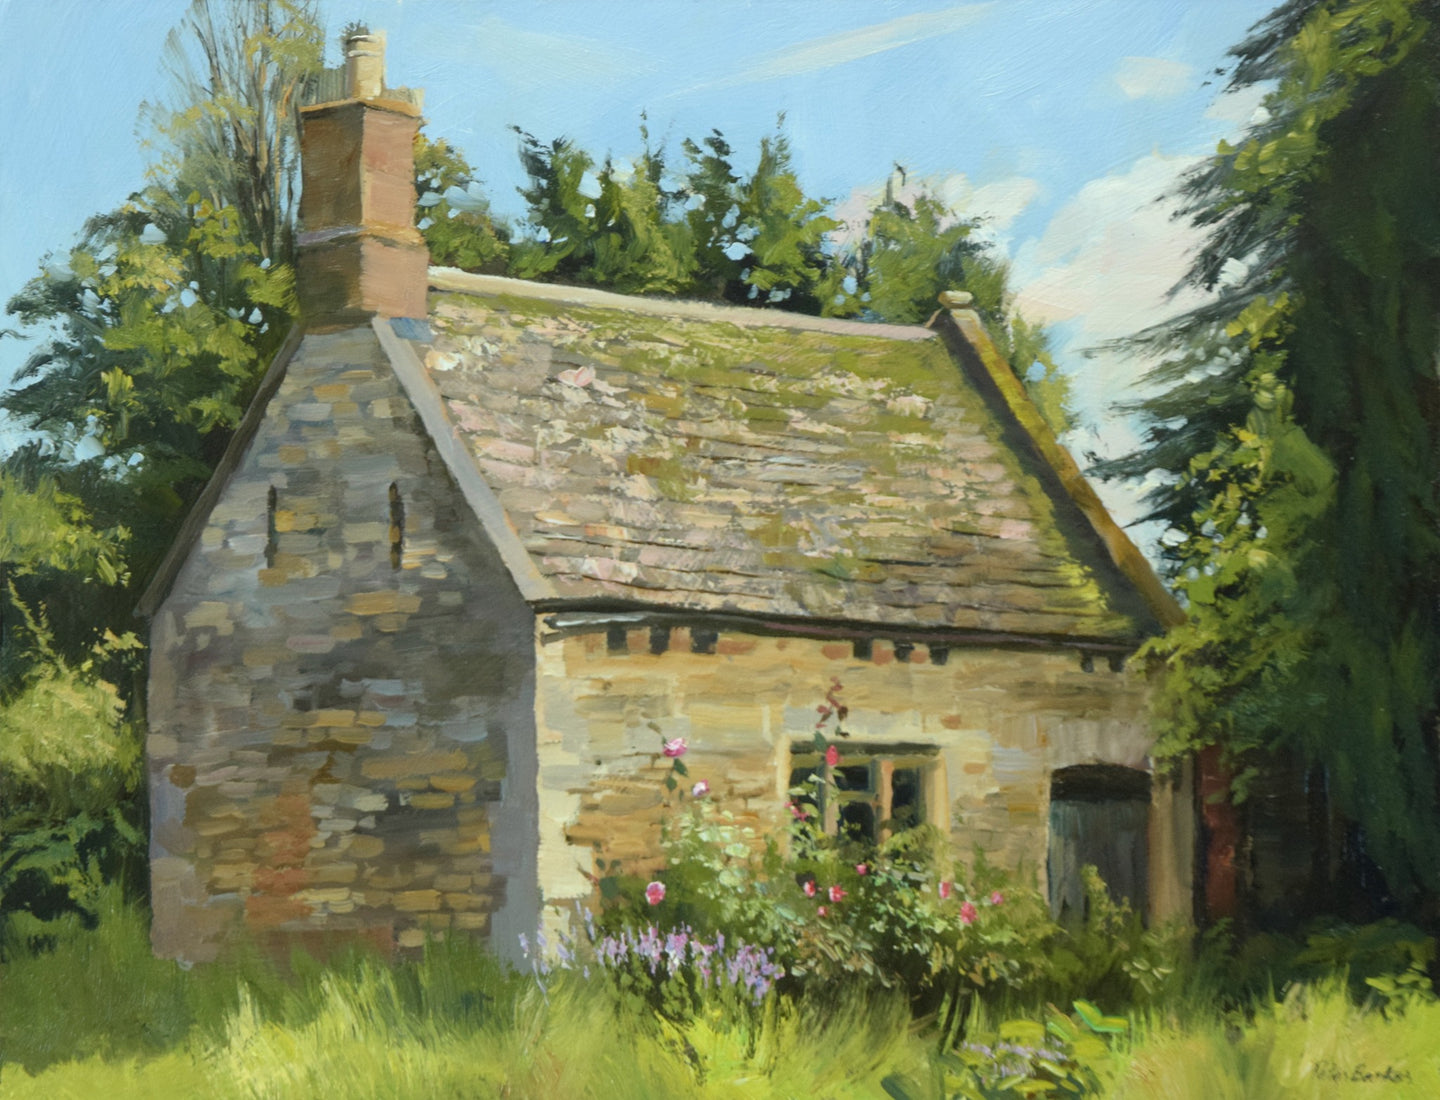 9x12 inch oil painting of the old stone Bothy in Lyndon, with one window and an old oak door, lit from the sun on the right.